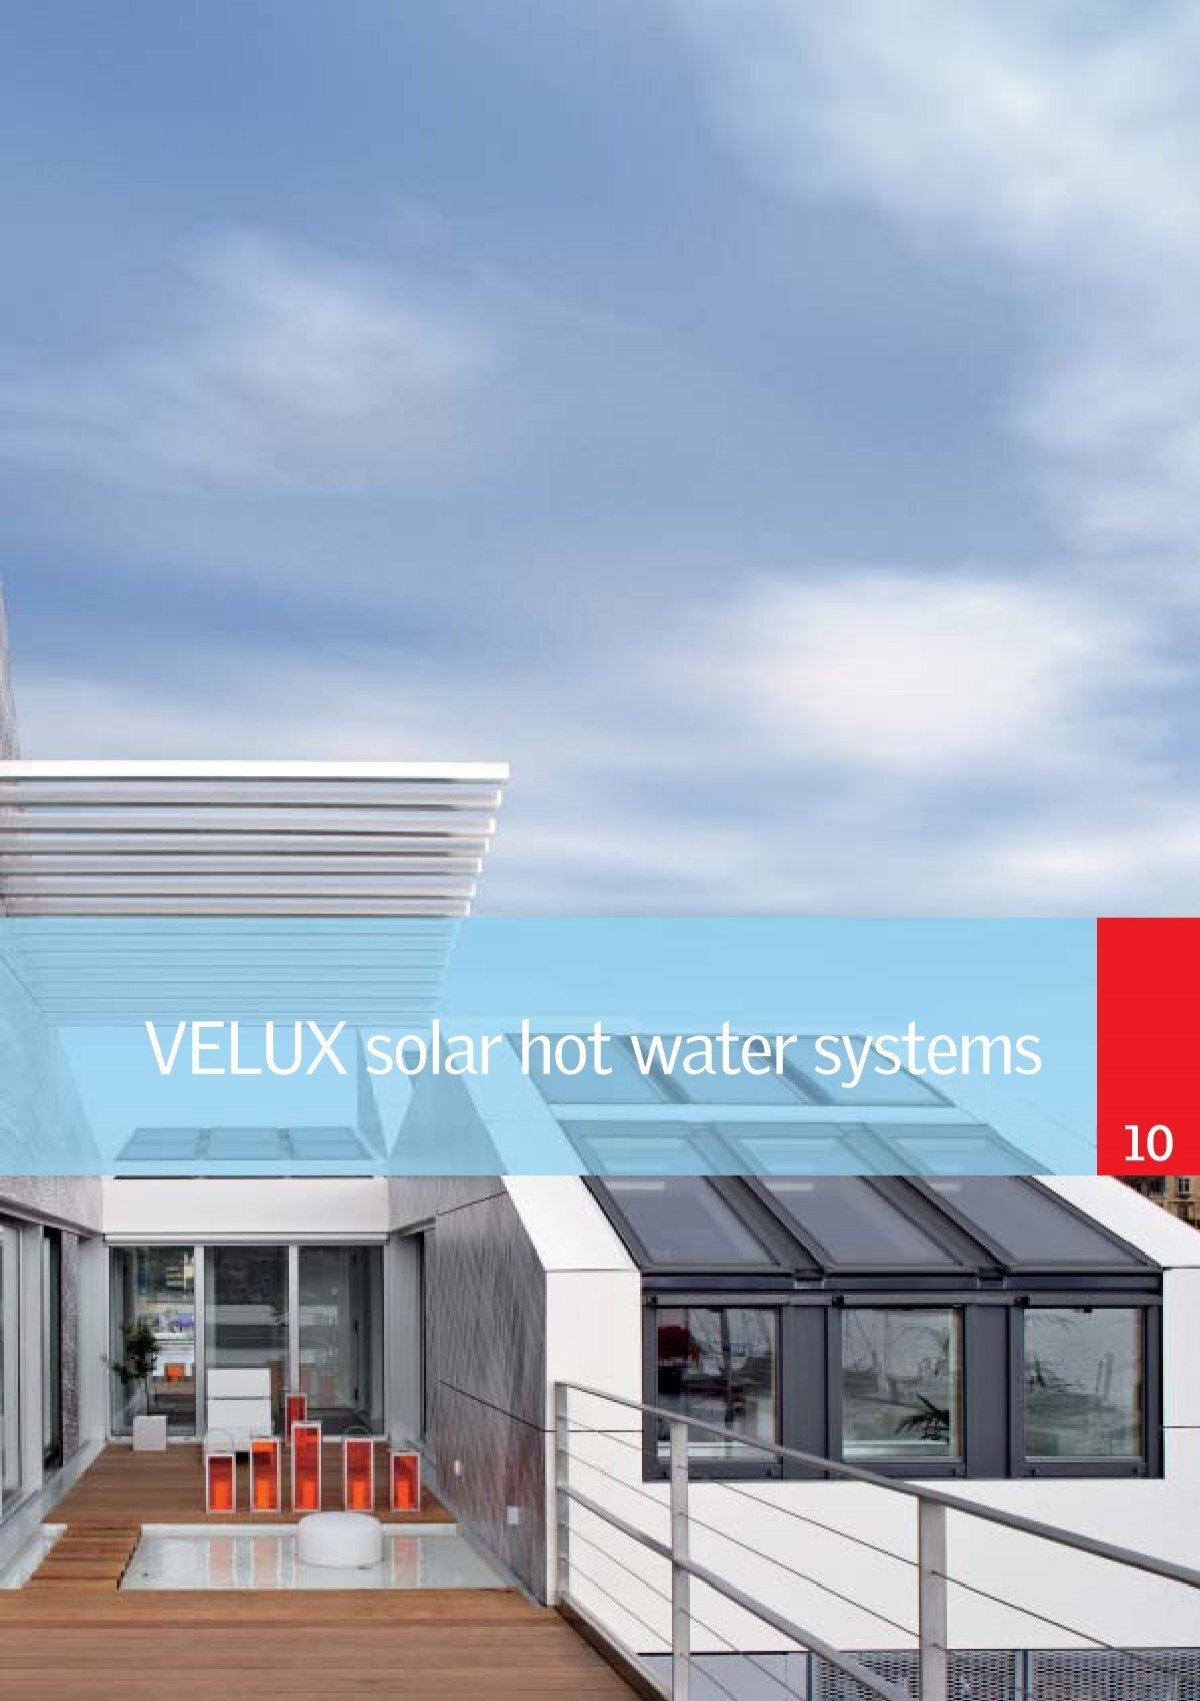 solar-hot-water-system-velux